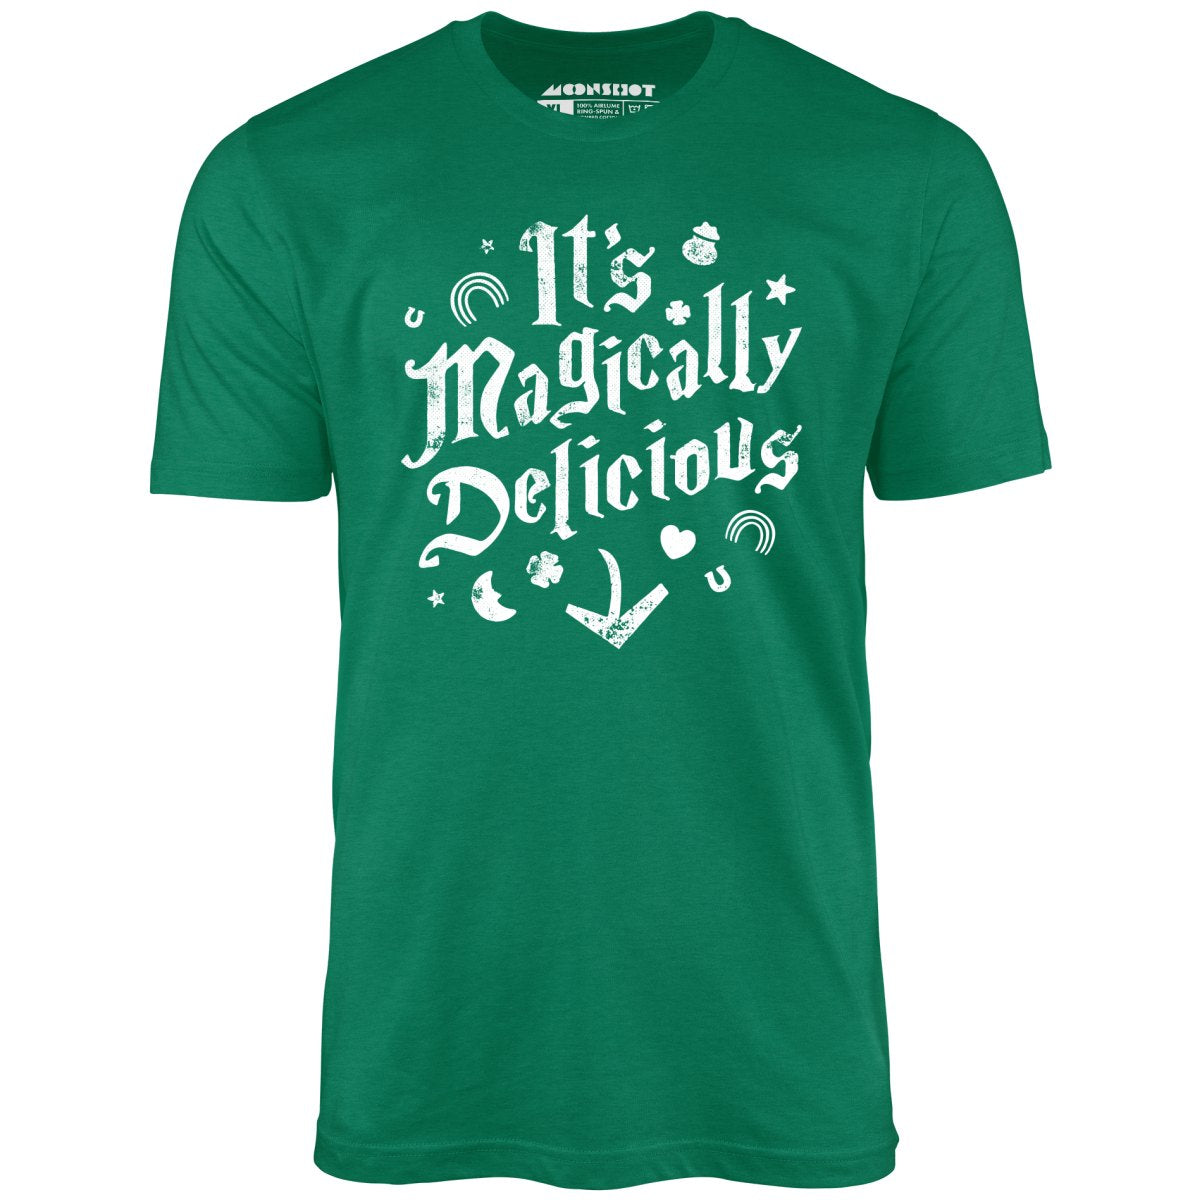 Magically Delicious - Unisex T-Shirt